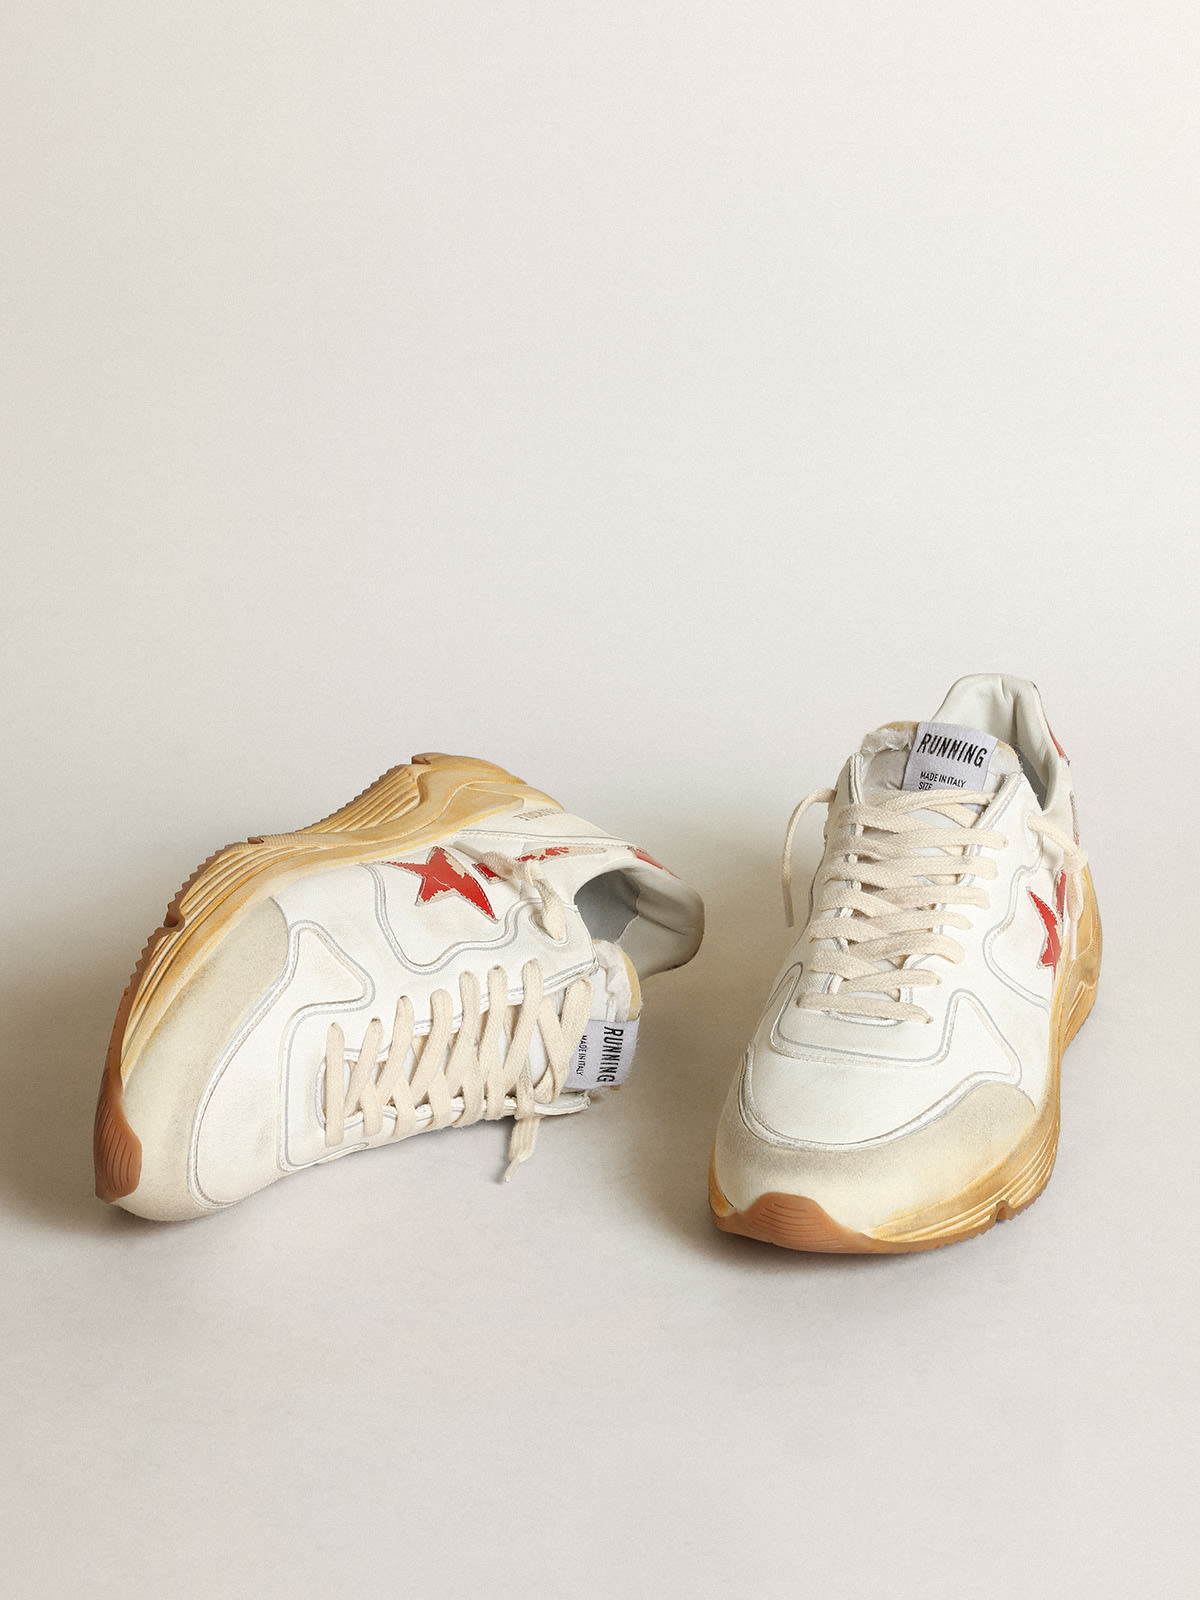 Golden Goose - Running Sole sneakers with star and heel tab in leather with red digital print in 